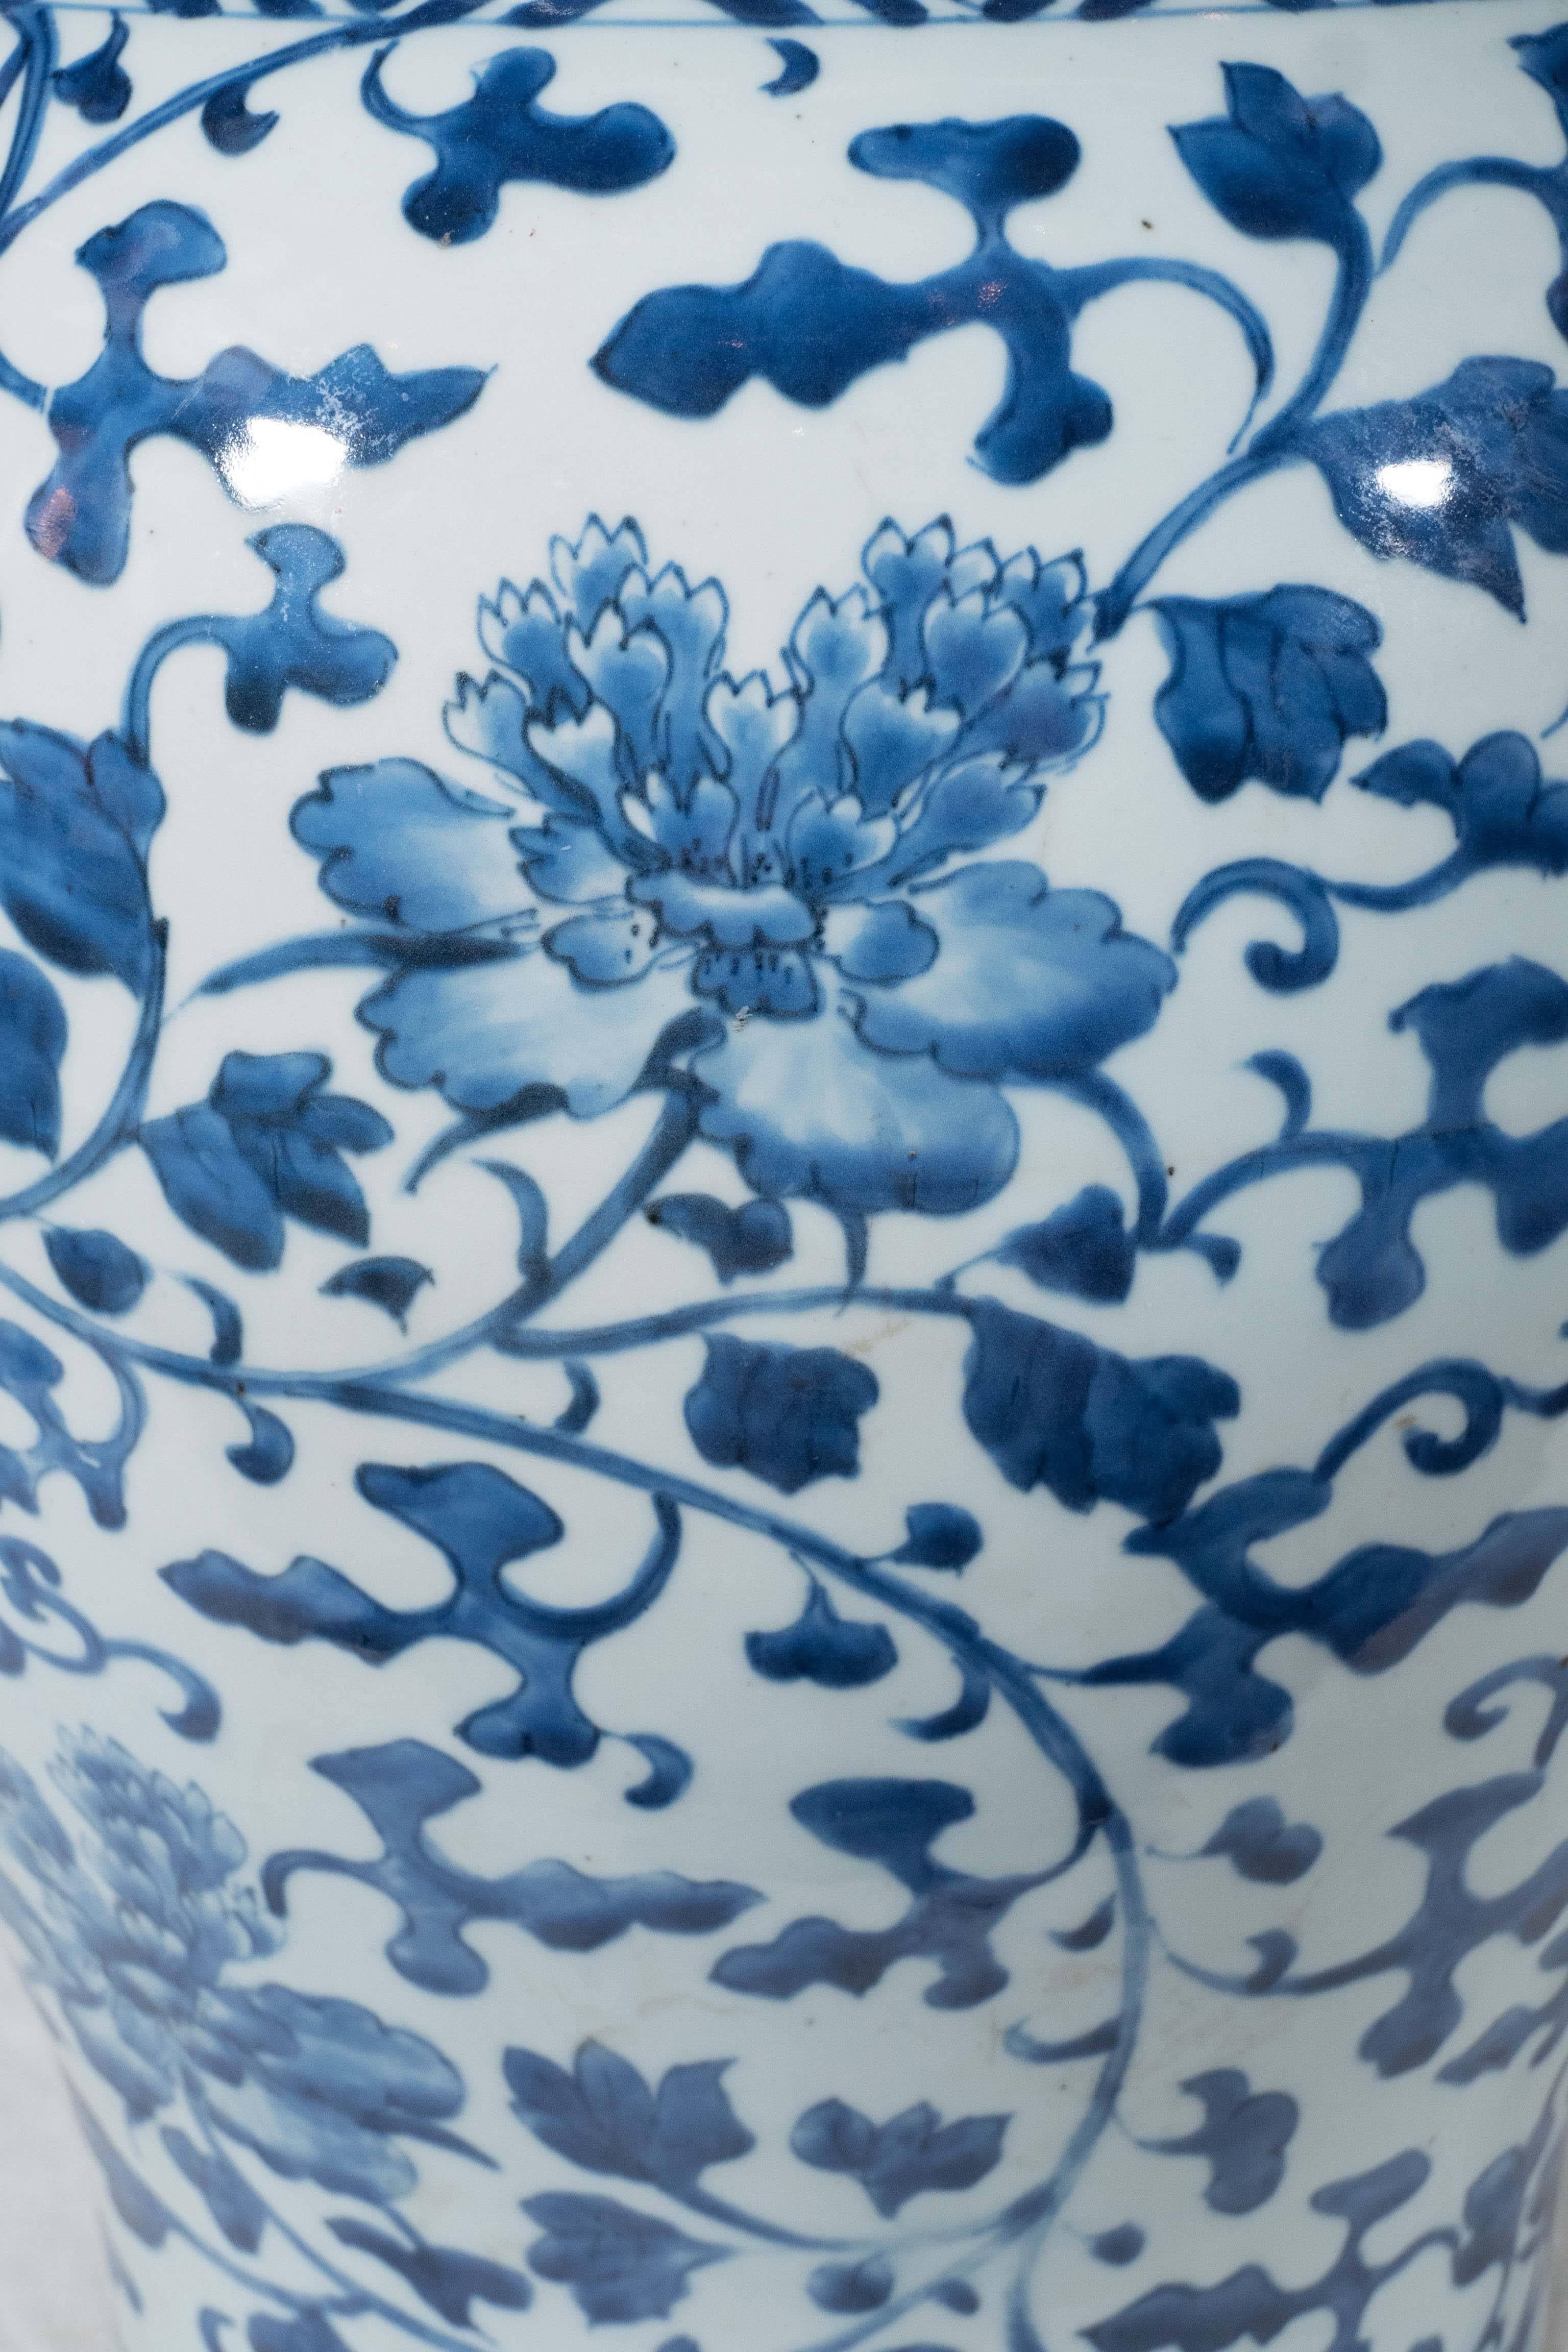 18th Century Antique Blue and White Chinese Porcelain Ginger Jars